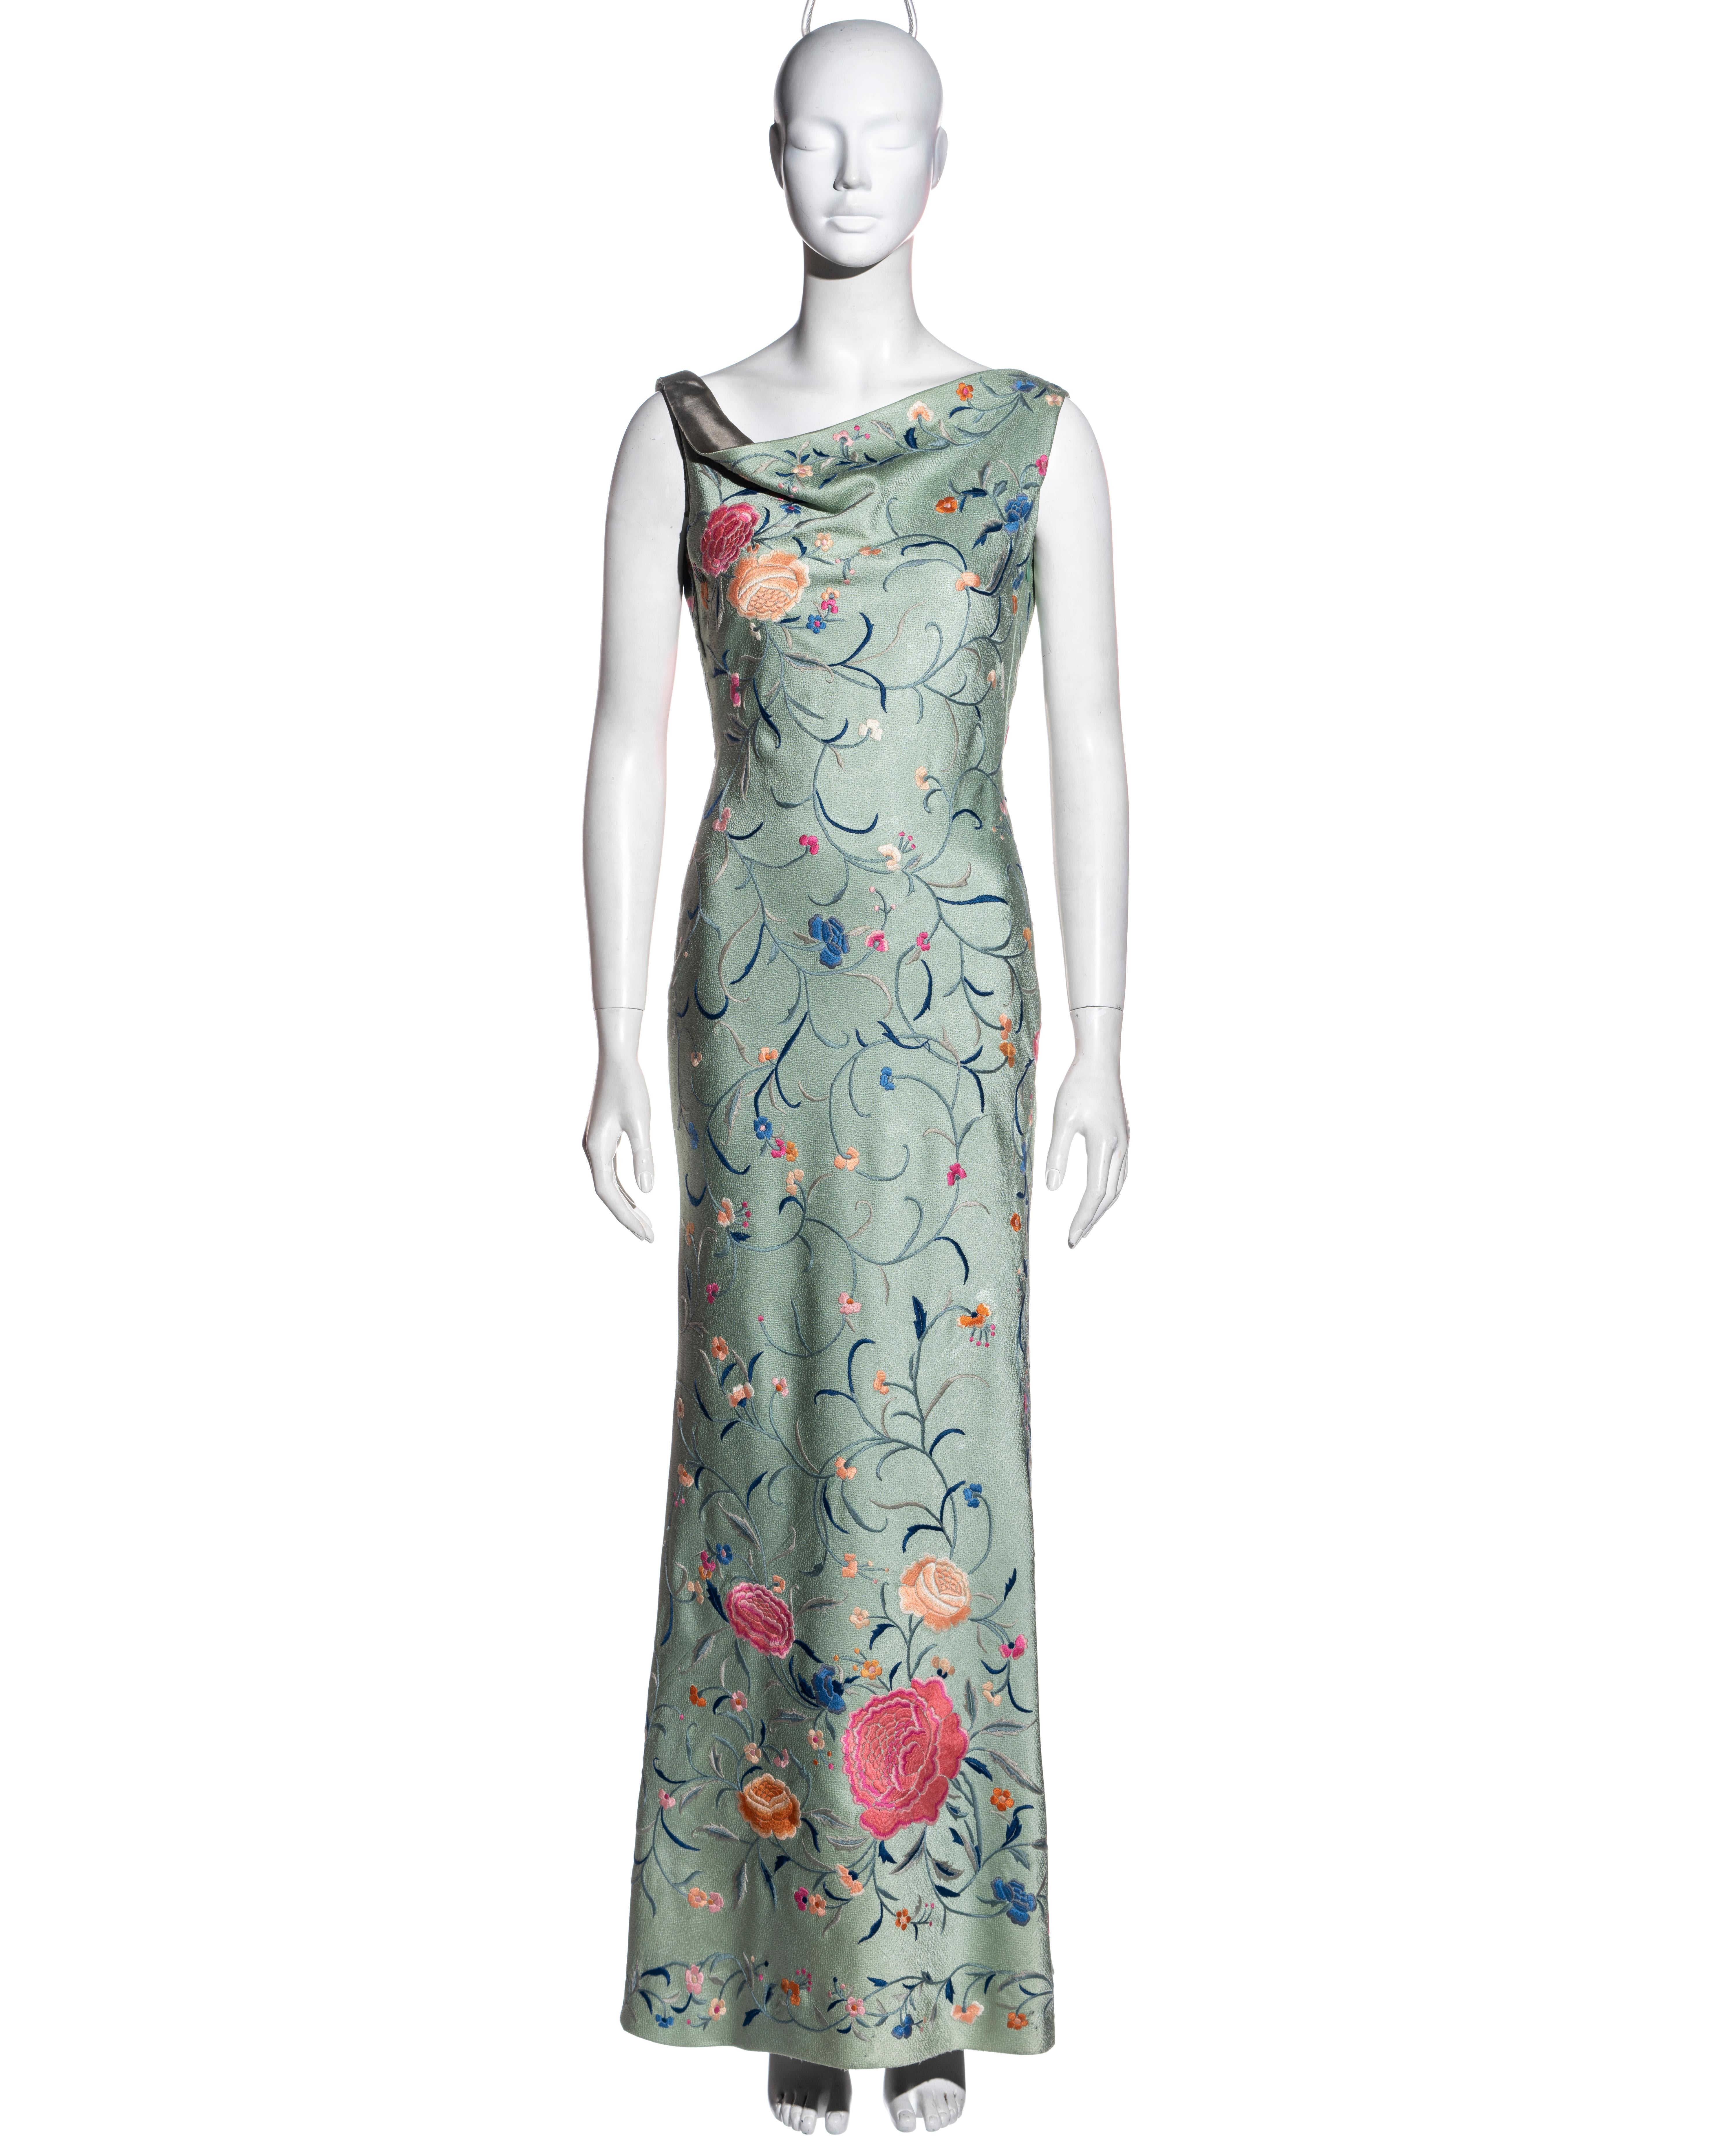 ▪ Important and rare Christian Dior mint silk hand-embroidered evening dress 
▪ Designed by John Galliano for his first RTW collection at Dior 
▪ Floral embroidery inspired by antique Chinese shawls 
▪ Cowl neckline with twisted shoulder strap 
▪